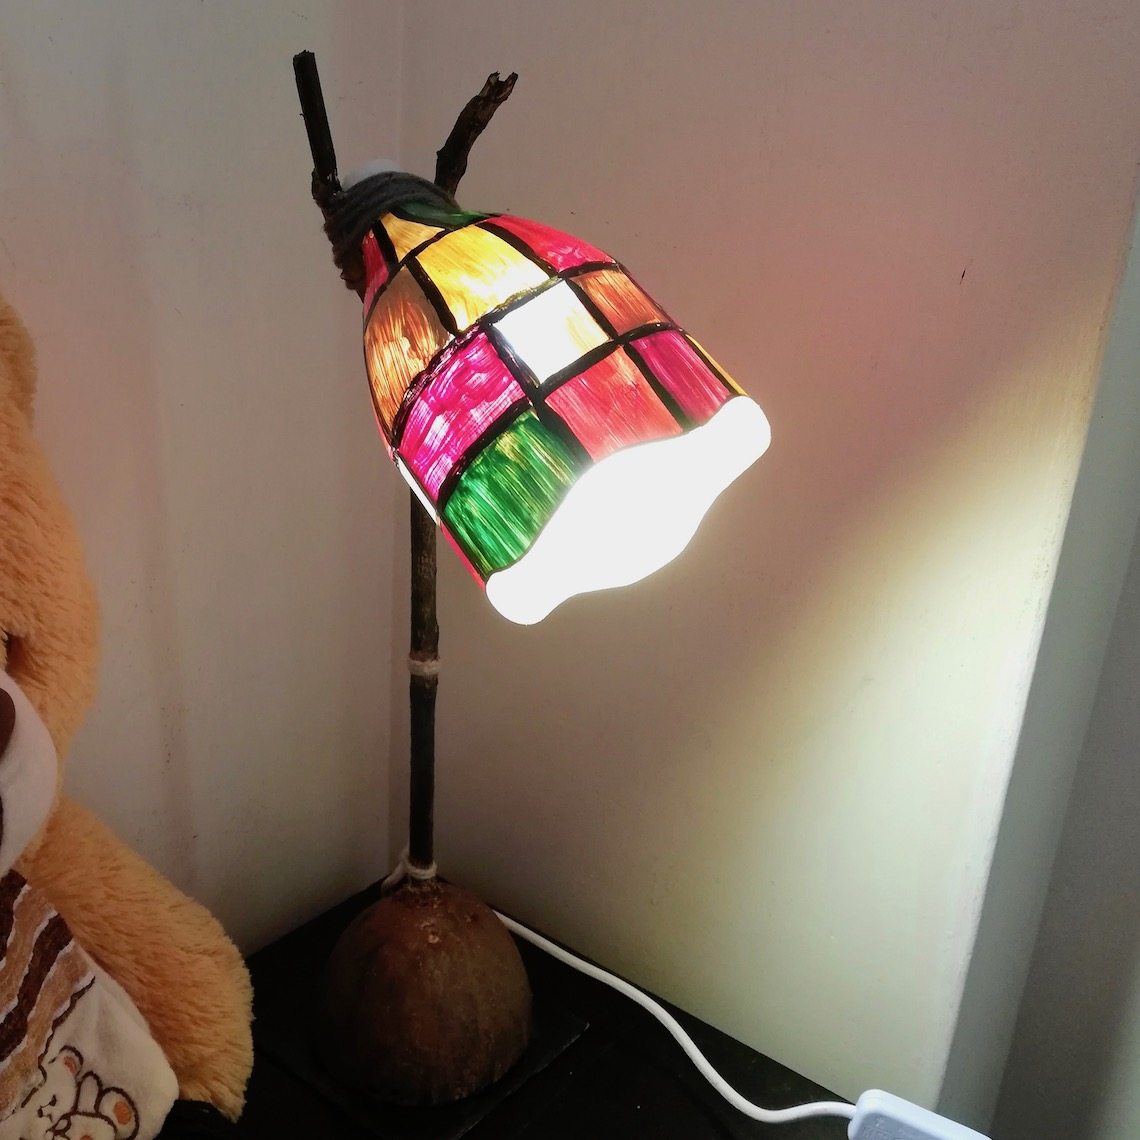 Junior School Student Designs, How To Make A Lampshade From Recycled Materials